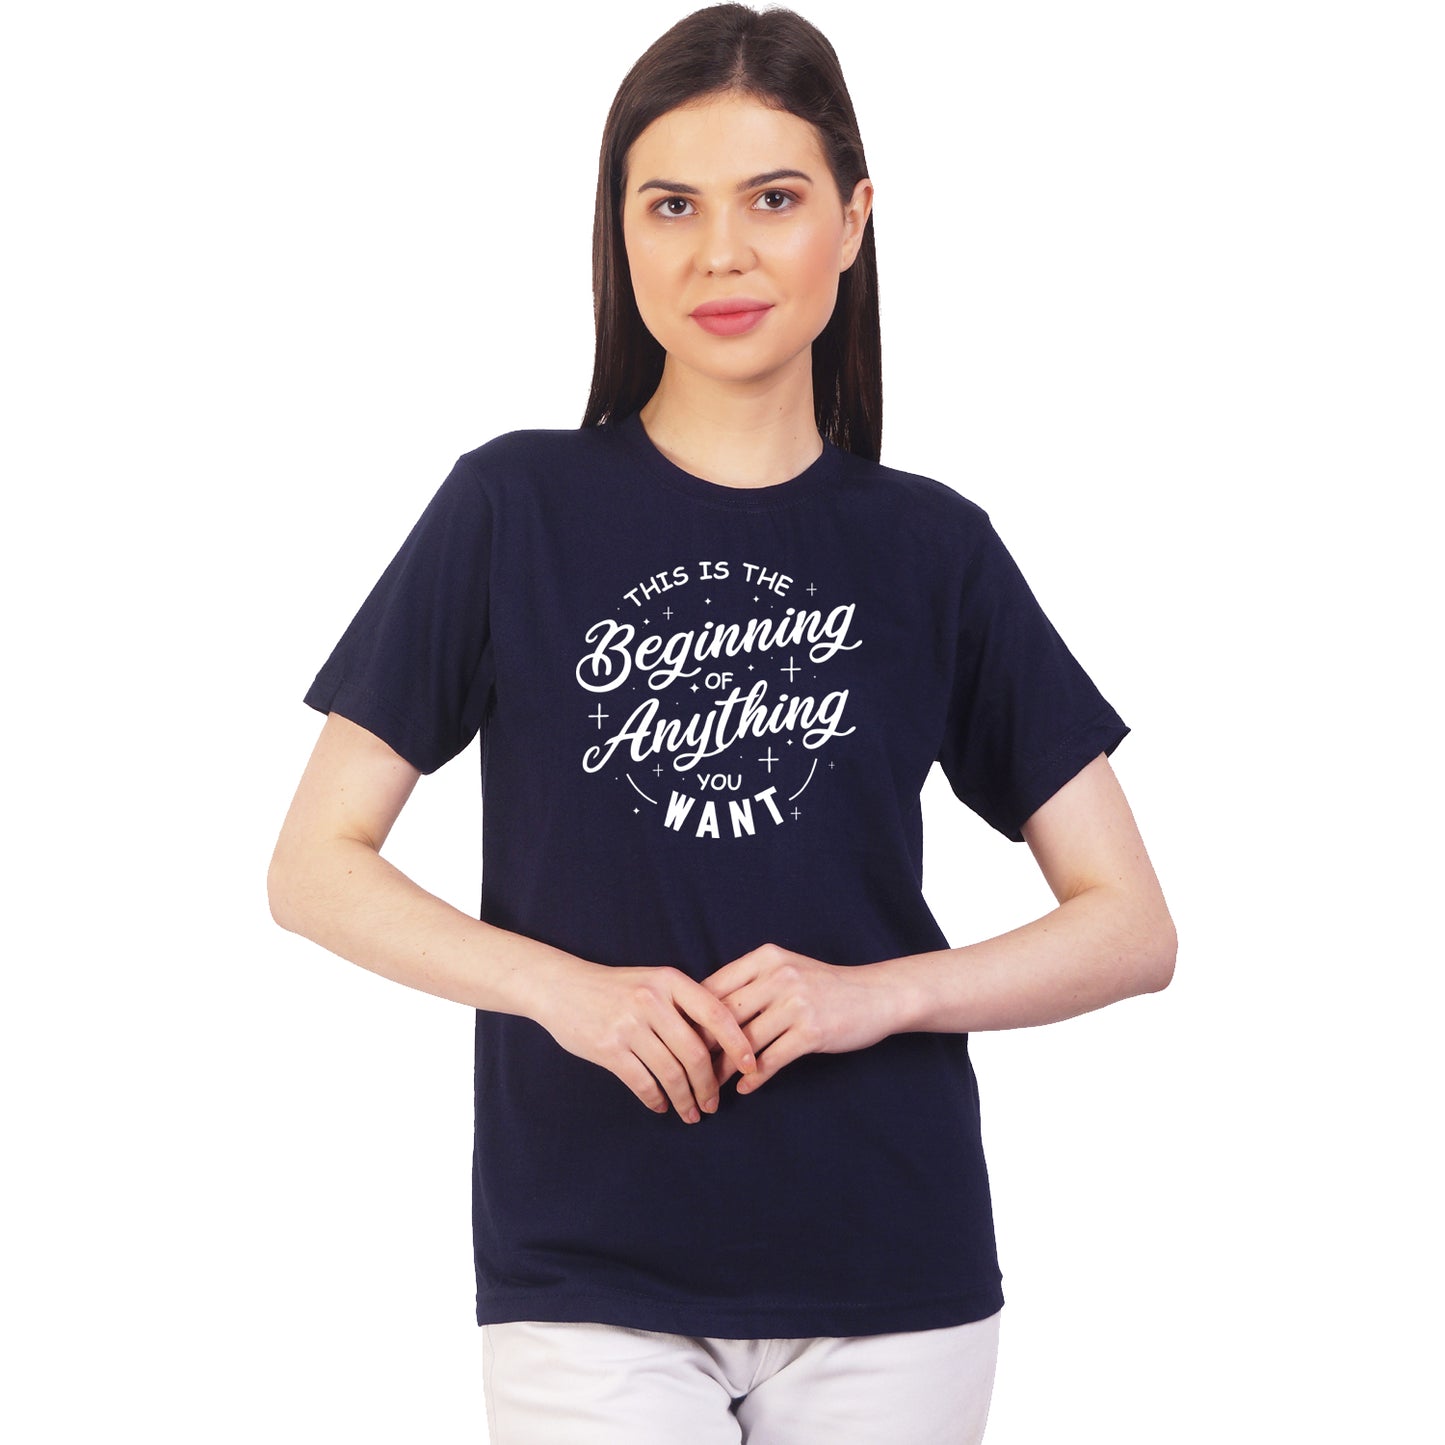 This is the beginning of anything you want cotton T-shirt | T002